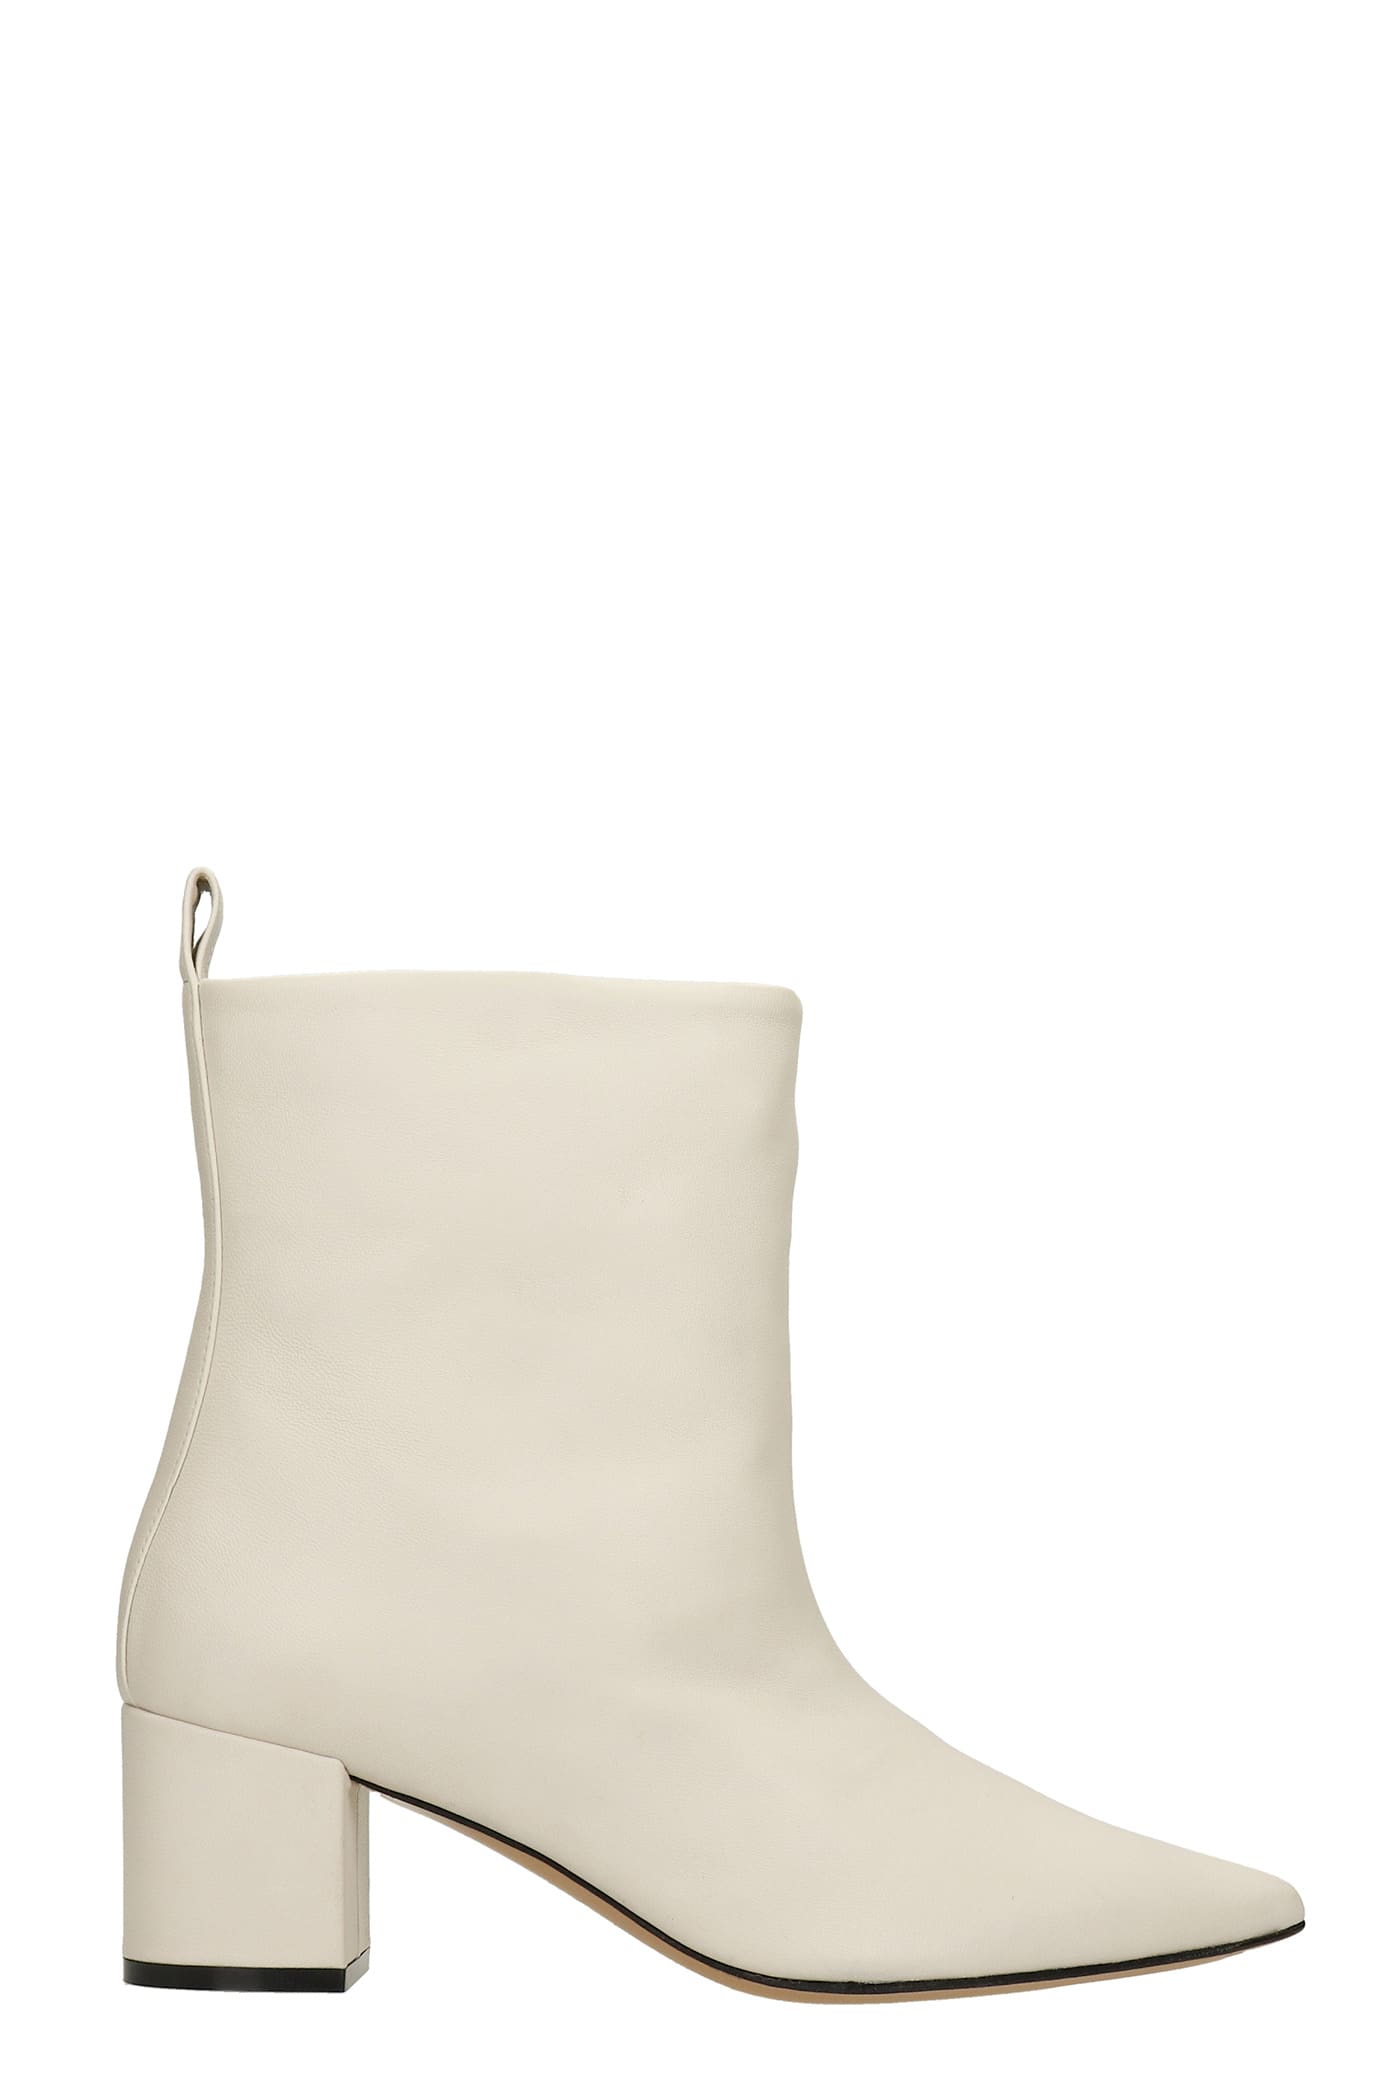 Marc Ellis Rivabella High Heels Ankle Boots In Beige Leather